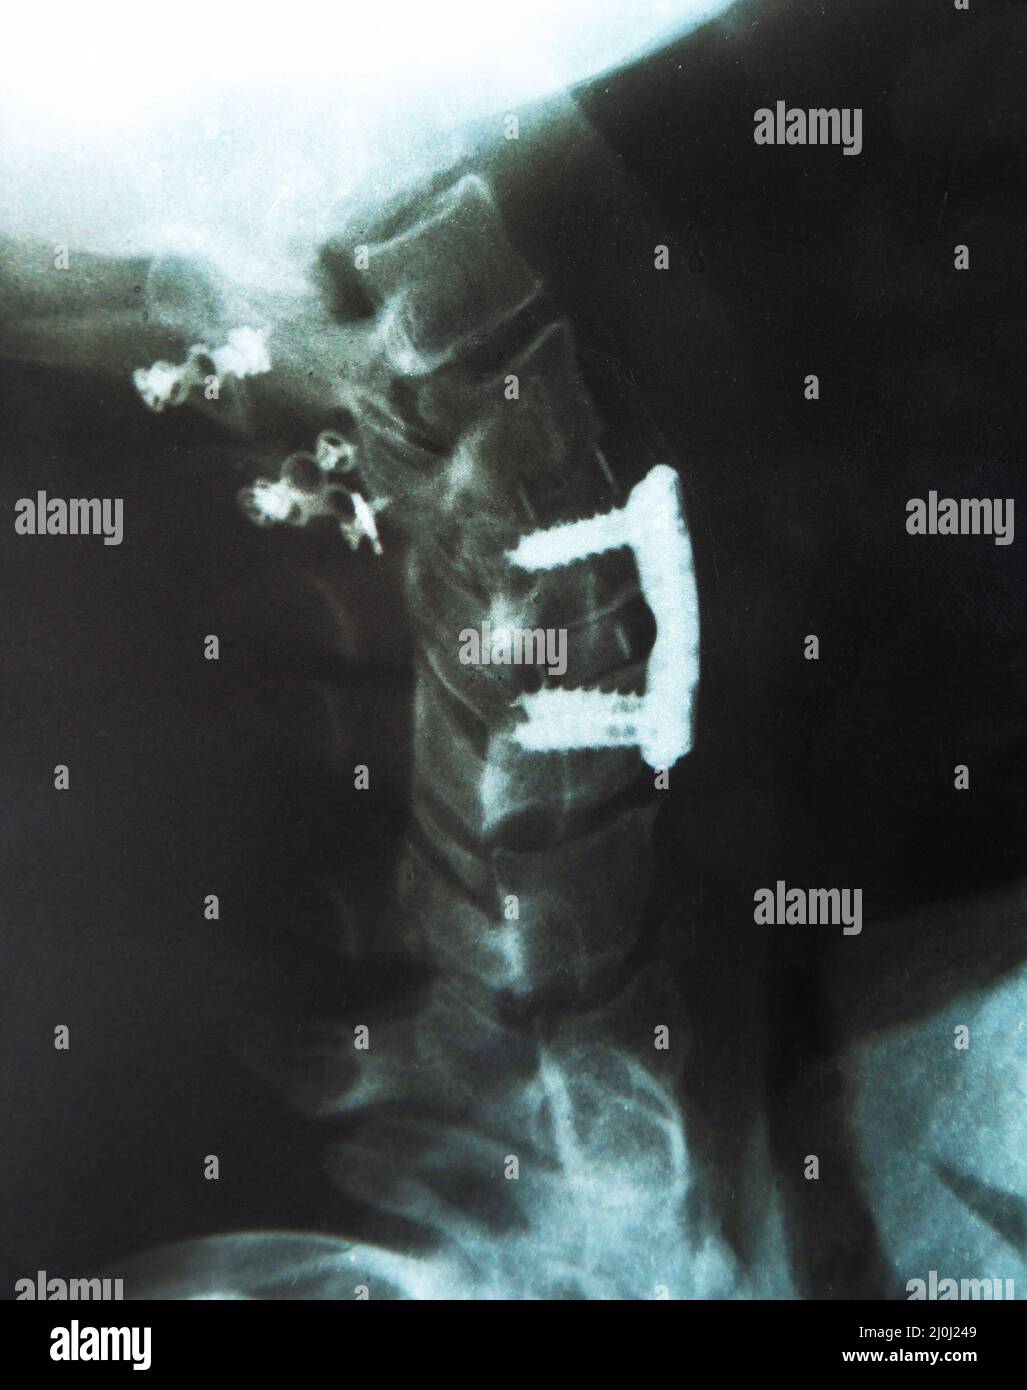 X-ray image of vertebral column with implant, screw placement and fusion Stock Photo